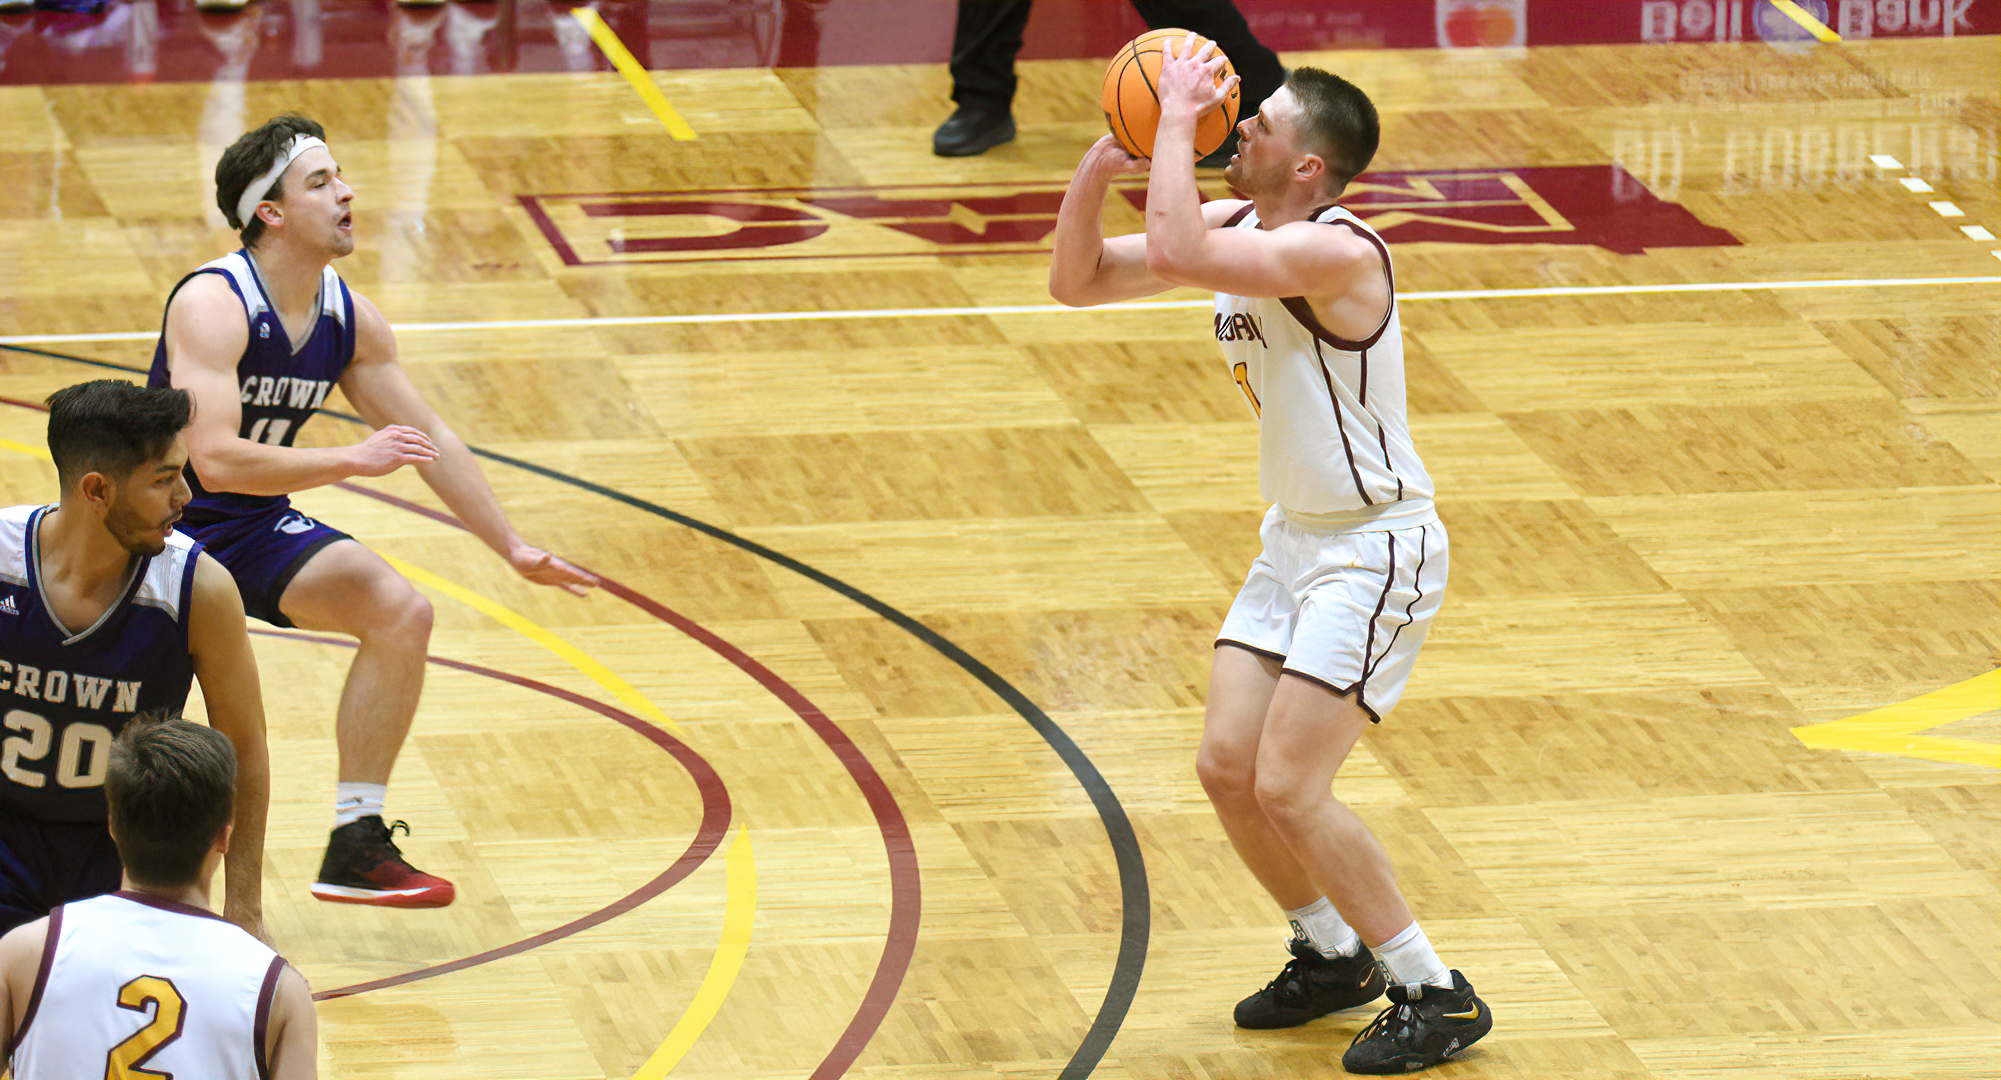 Matthew Johnson gets ready to drain one of his six 3-point shots on his way to a career-high 42 points in the Cobbers' game with Crown.